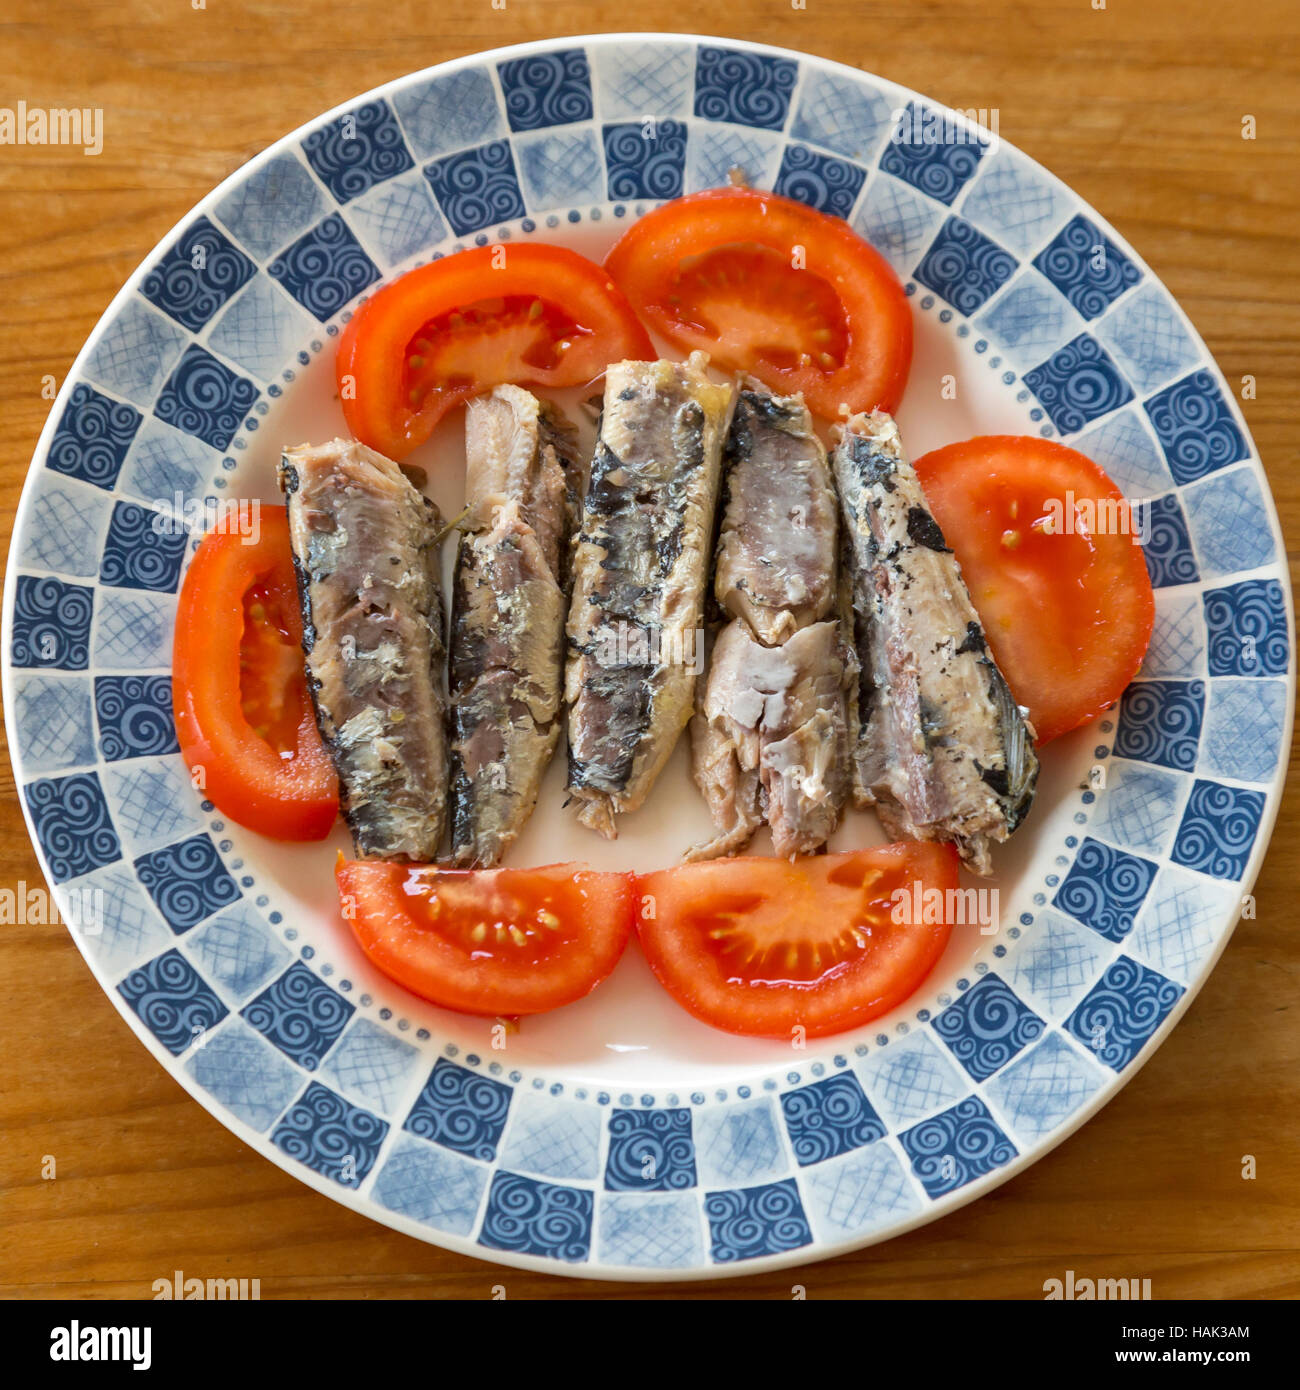 Tinned Sardines and tomato on a plate Stock Photo